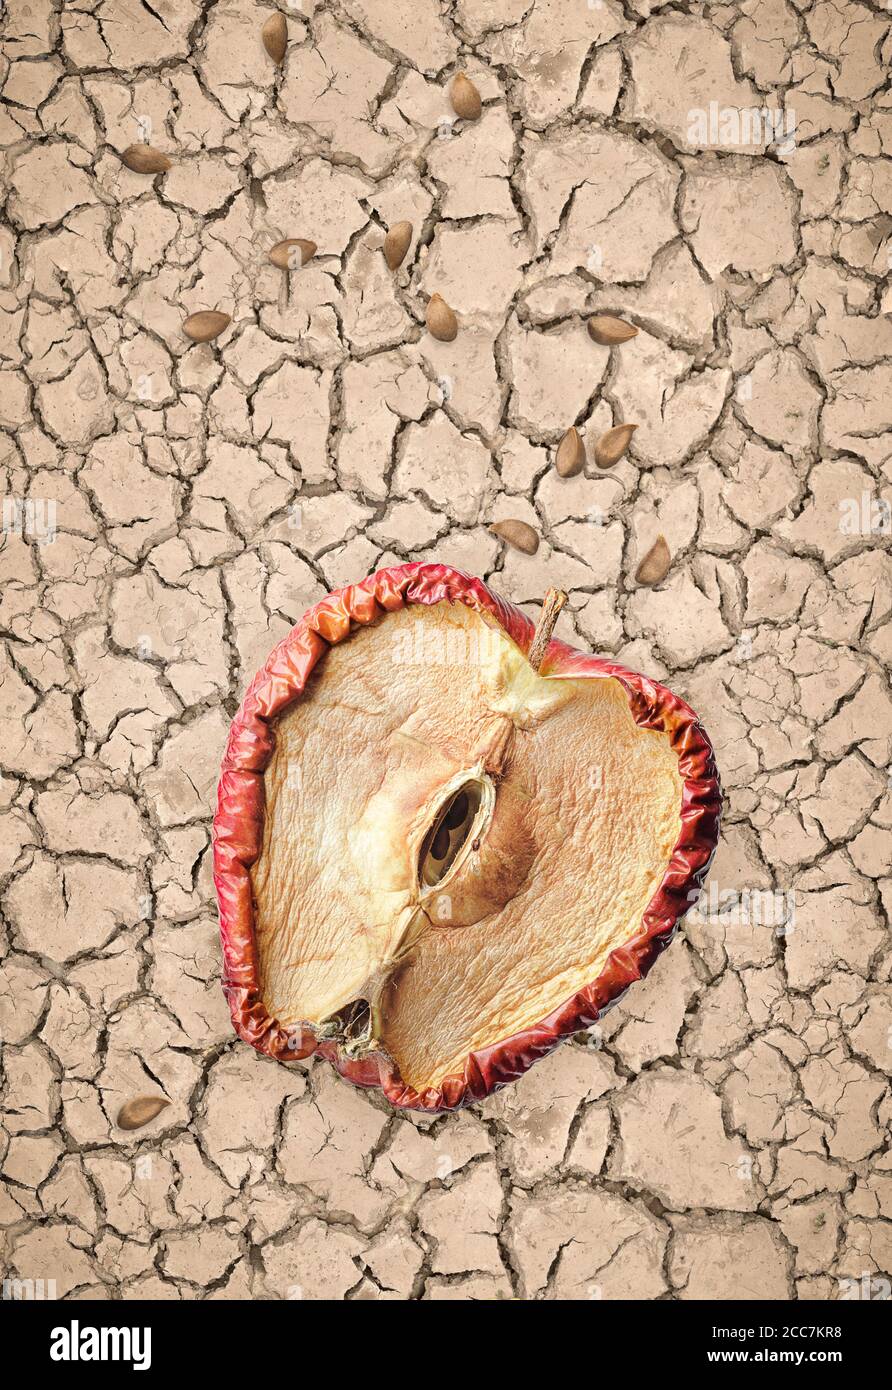 Half rotten apple and seeds on dry and cracked soil, hopeless concept with no future. Stock Photo